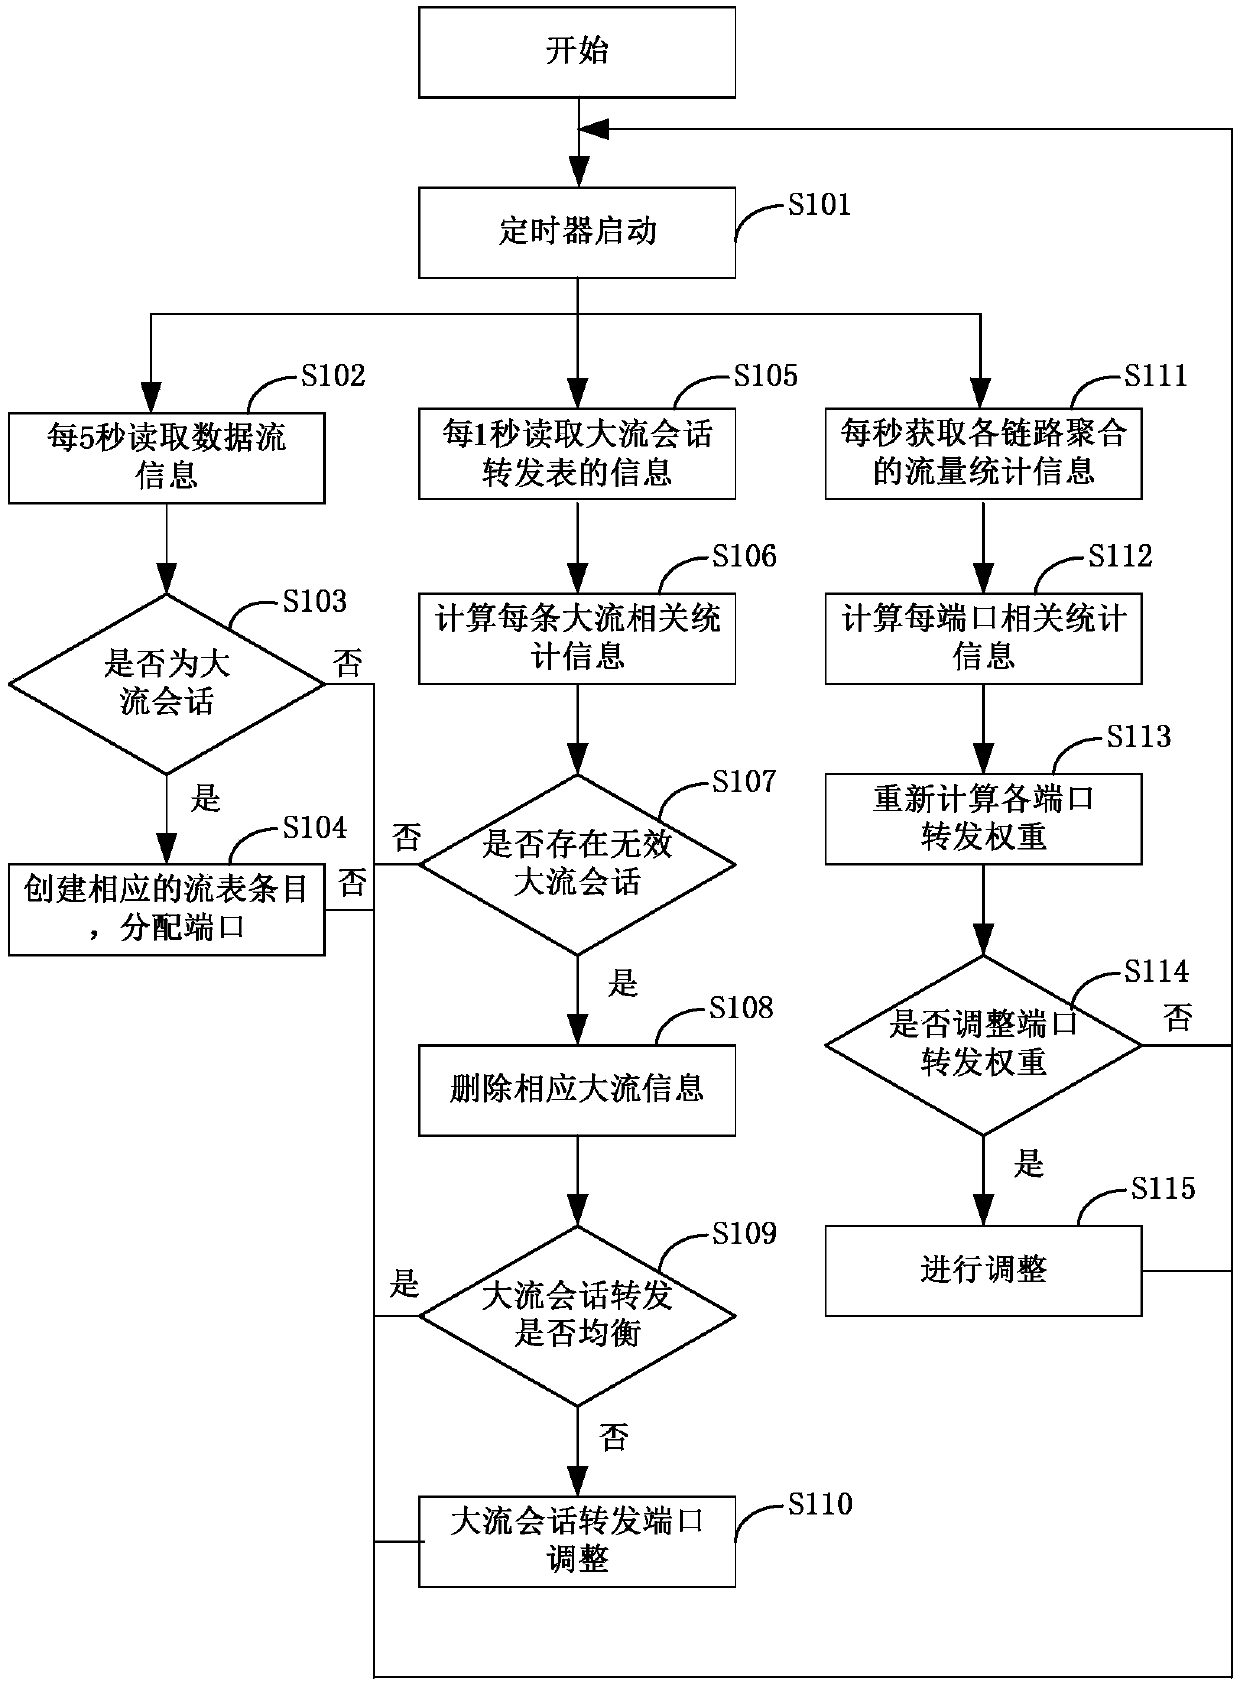 Load sharing method and system of link aggregation